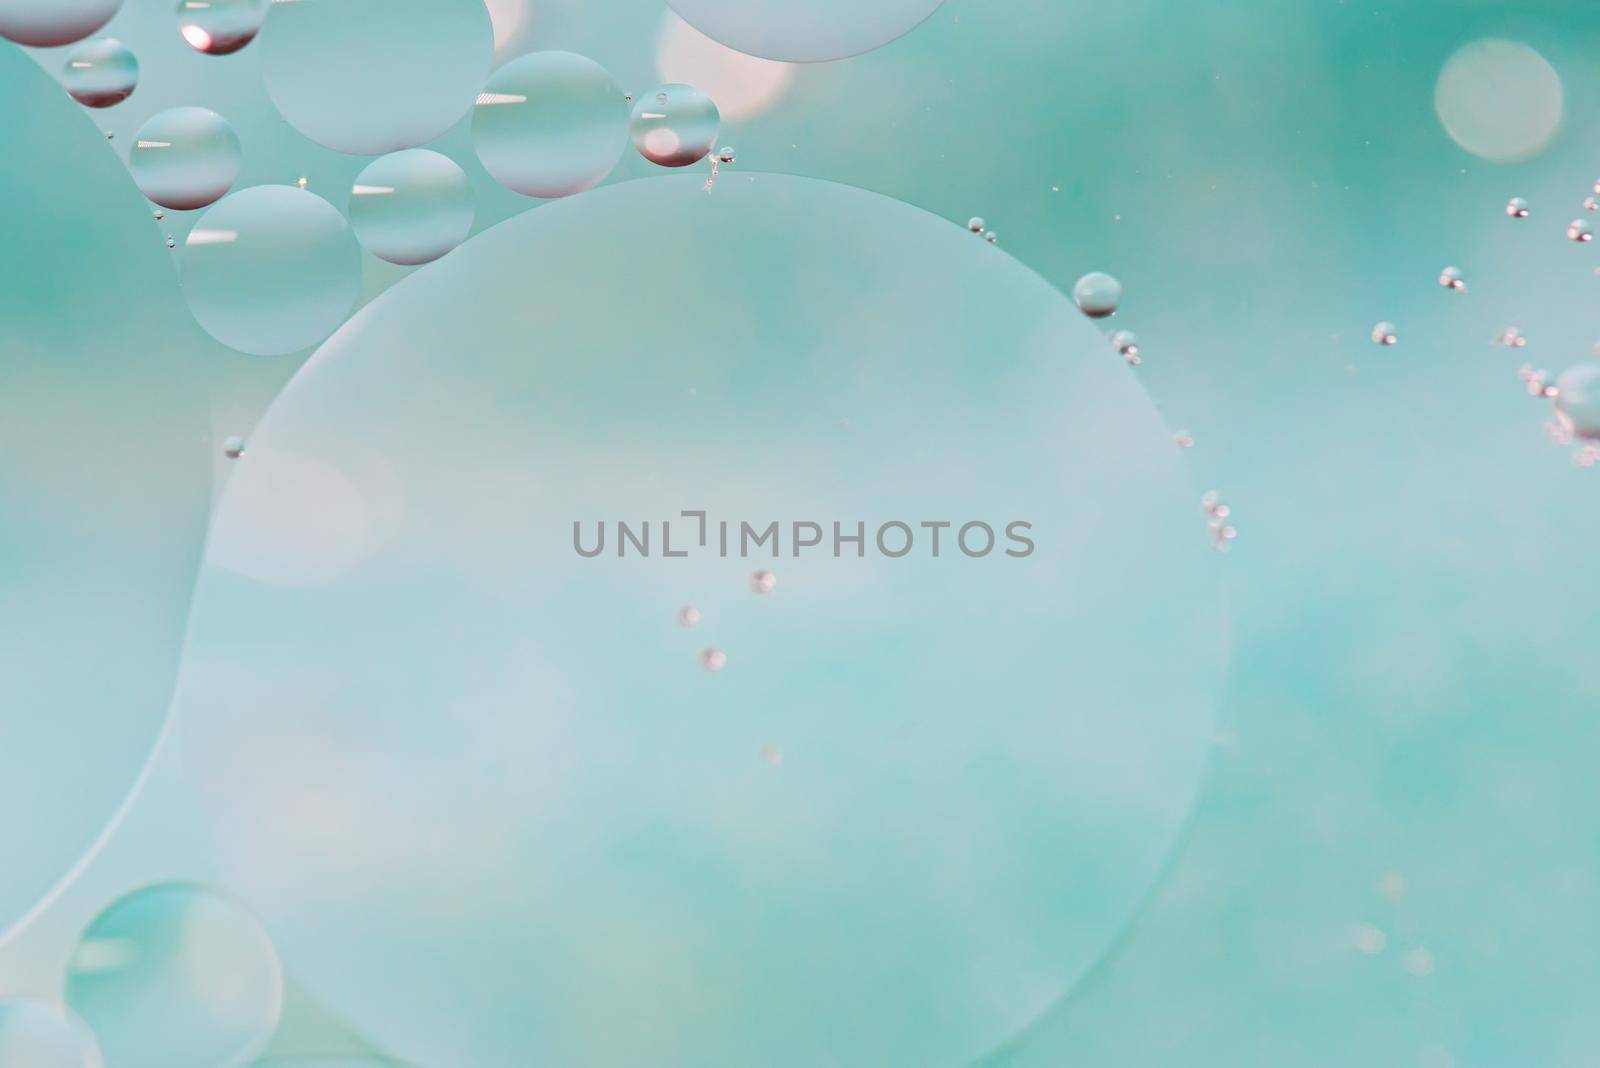 Oil drops in water. Defocused abstract psychedelic pattern image light blue colored. DOF.